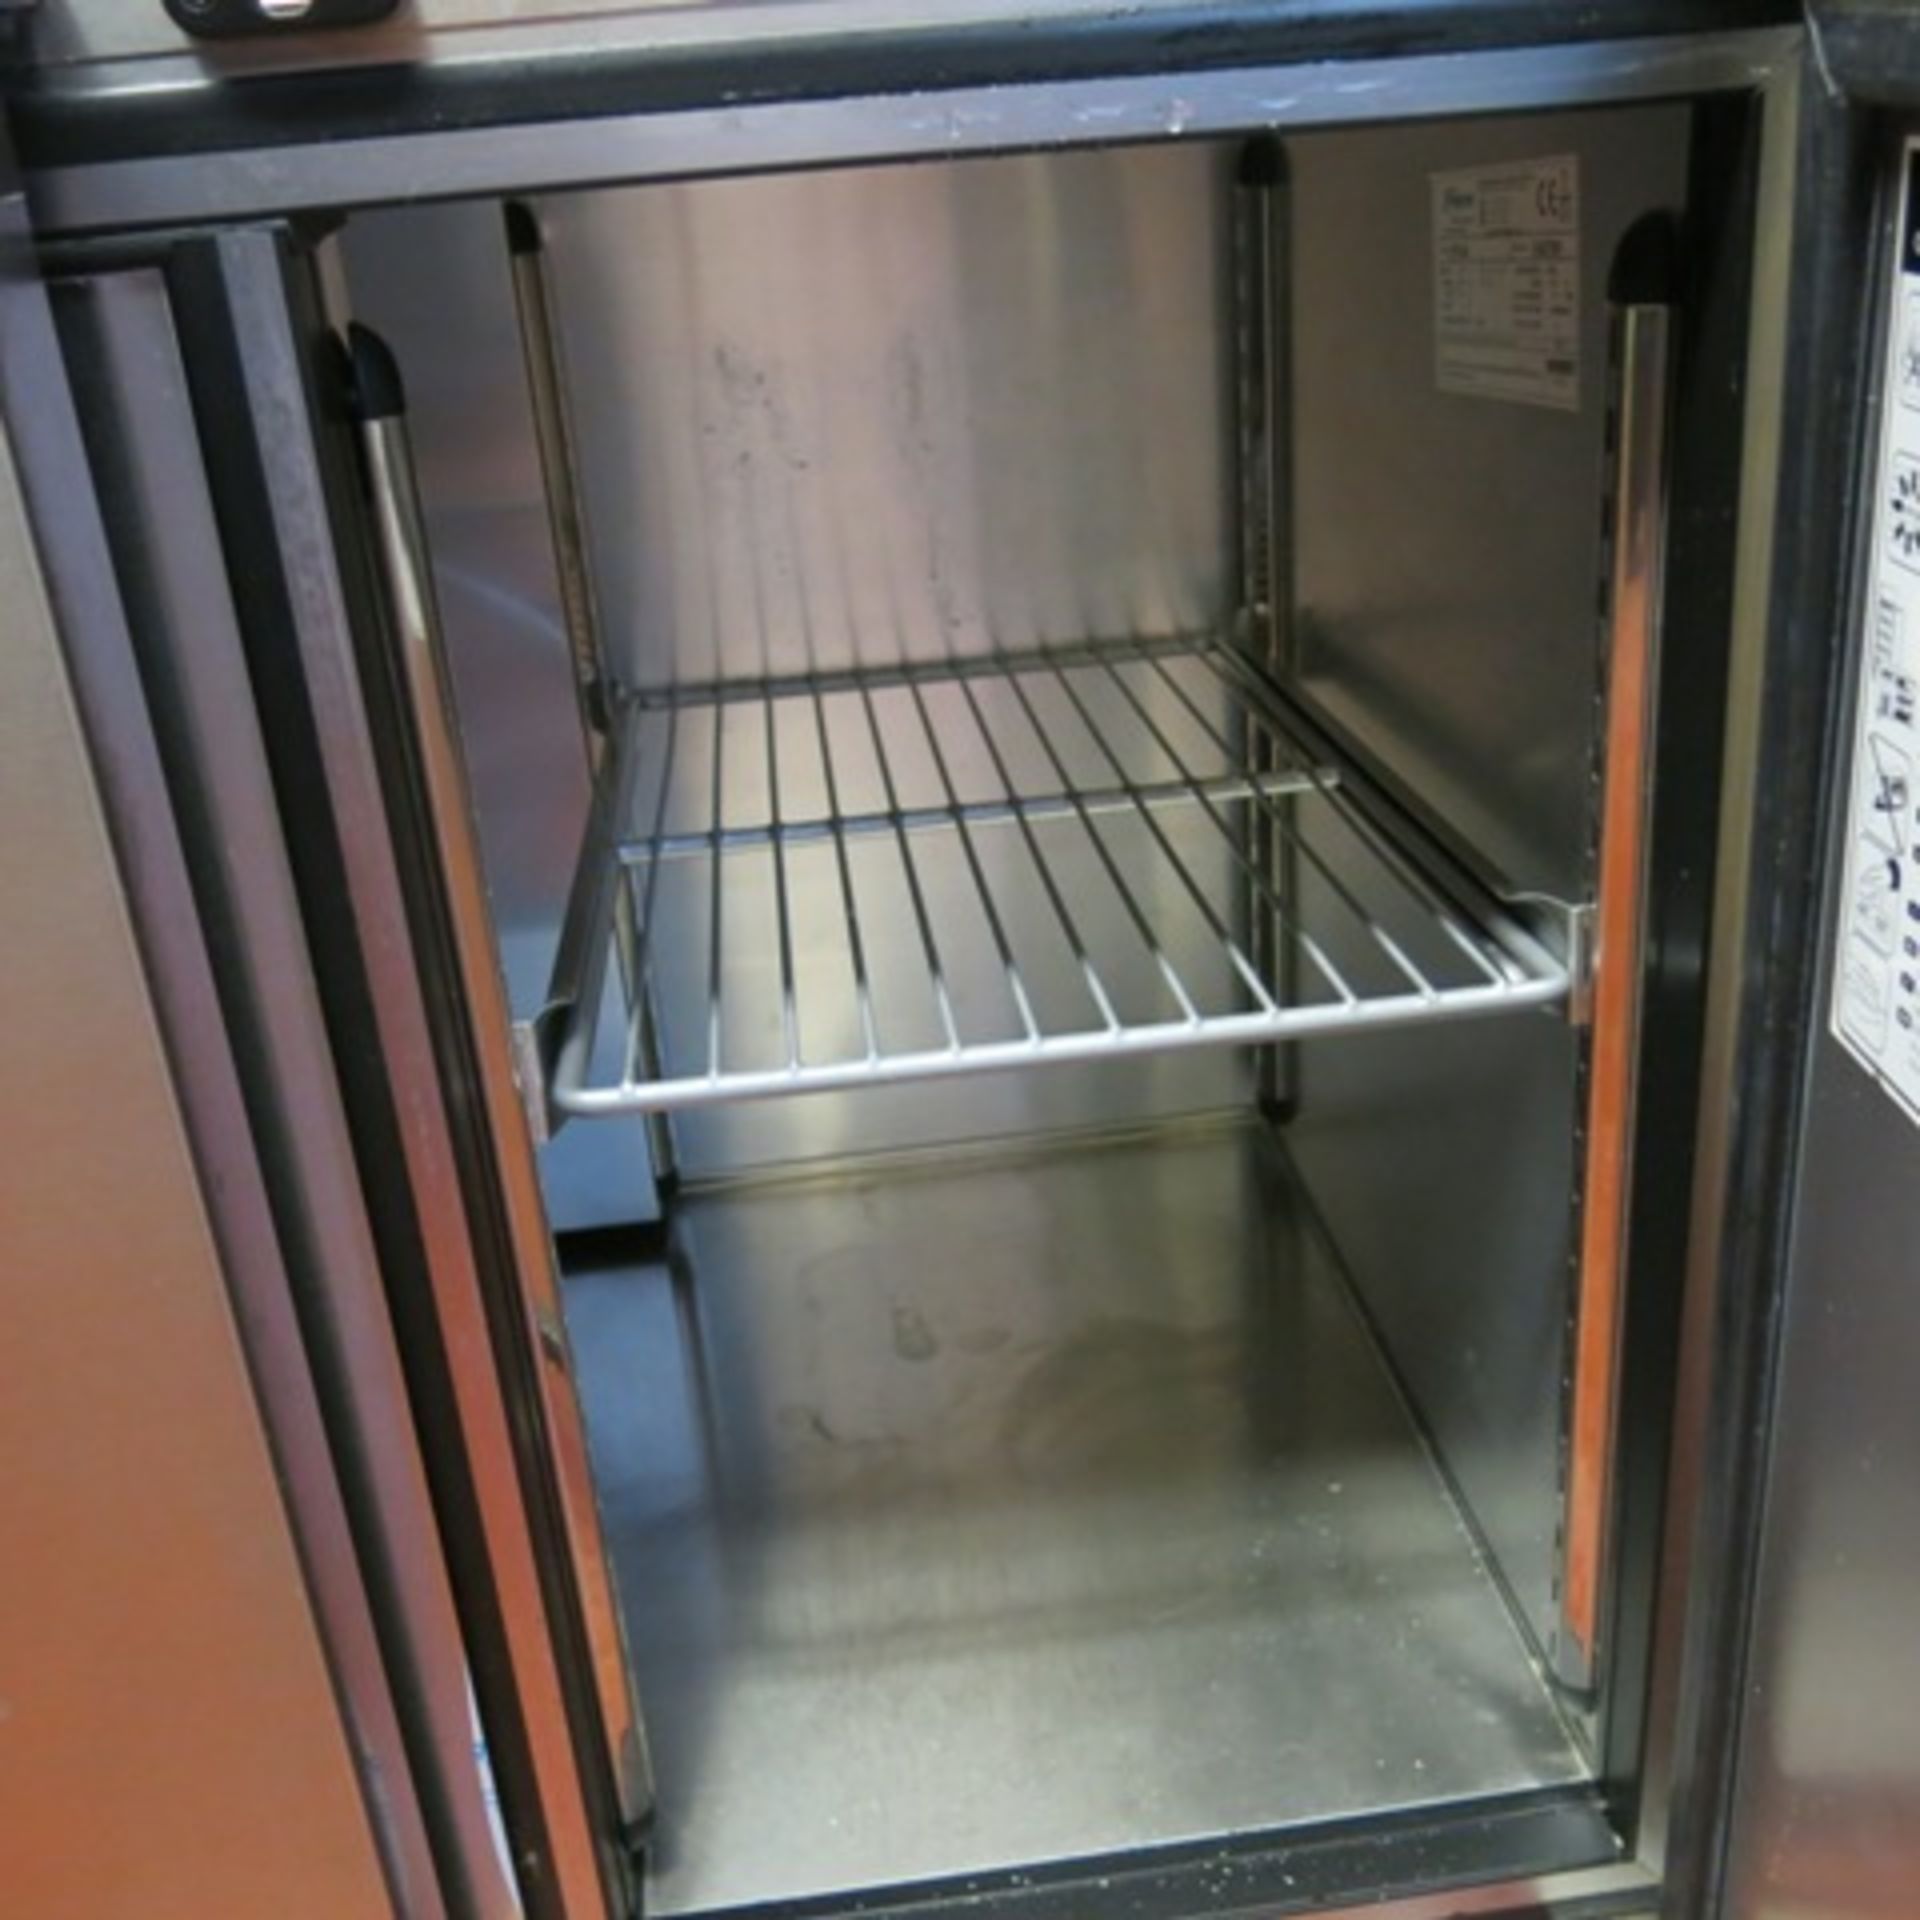 Foster High Grade Stainless Steel 304 Refrigerated Counter/Work Top. Model EP 1/4HSA Eco Pro G2 Four - Image 6 of 6